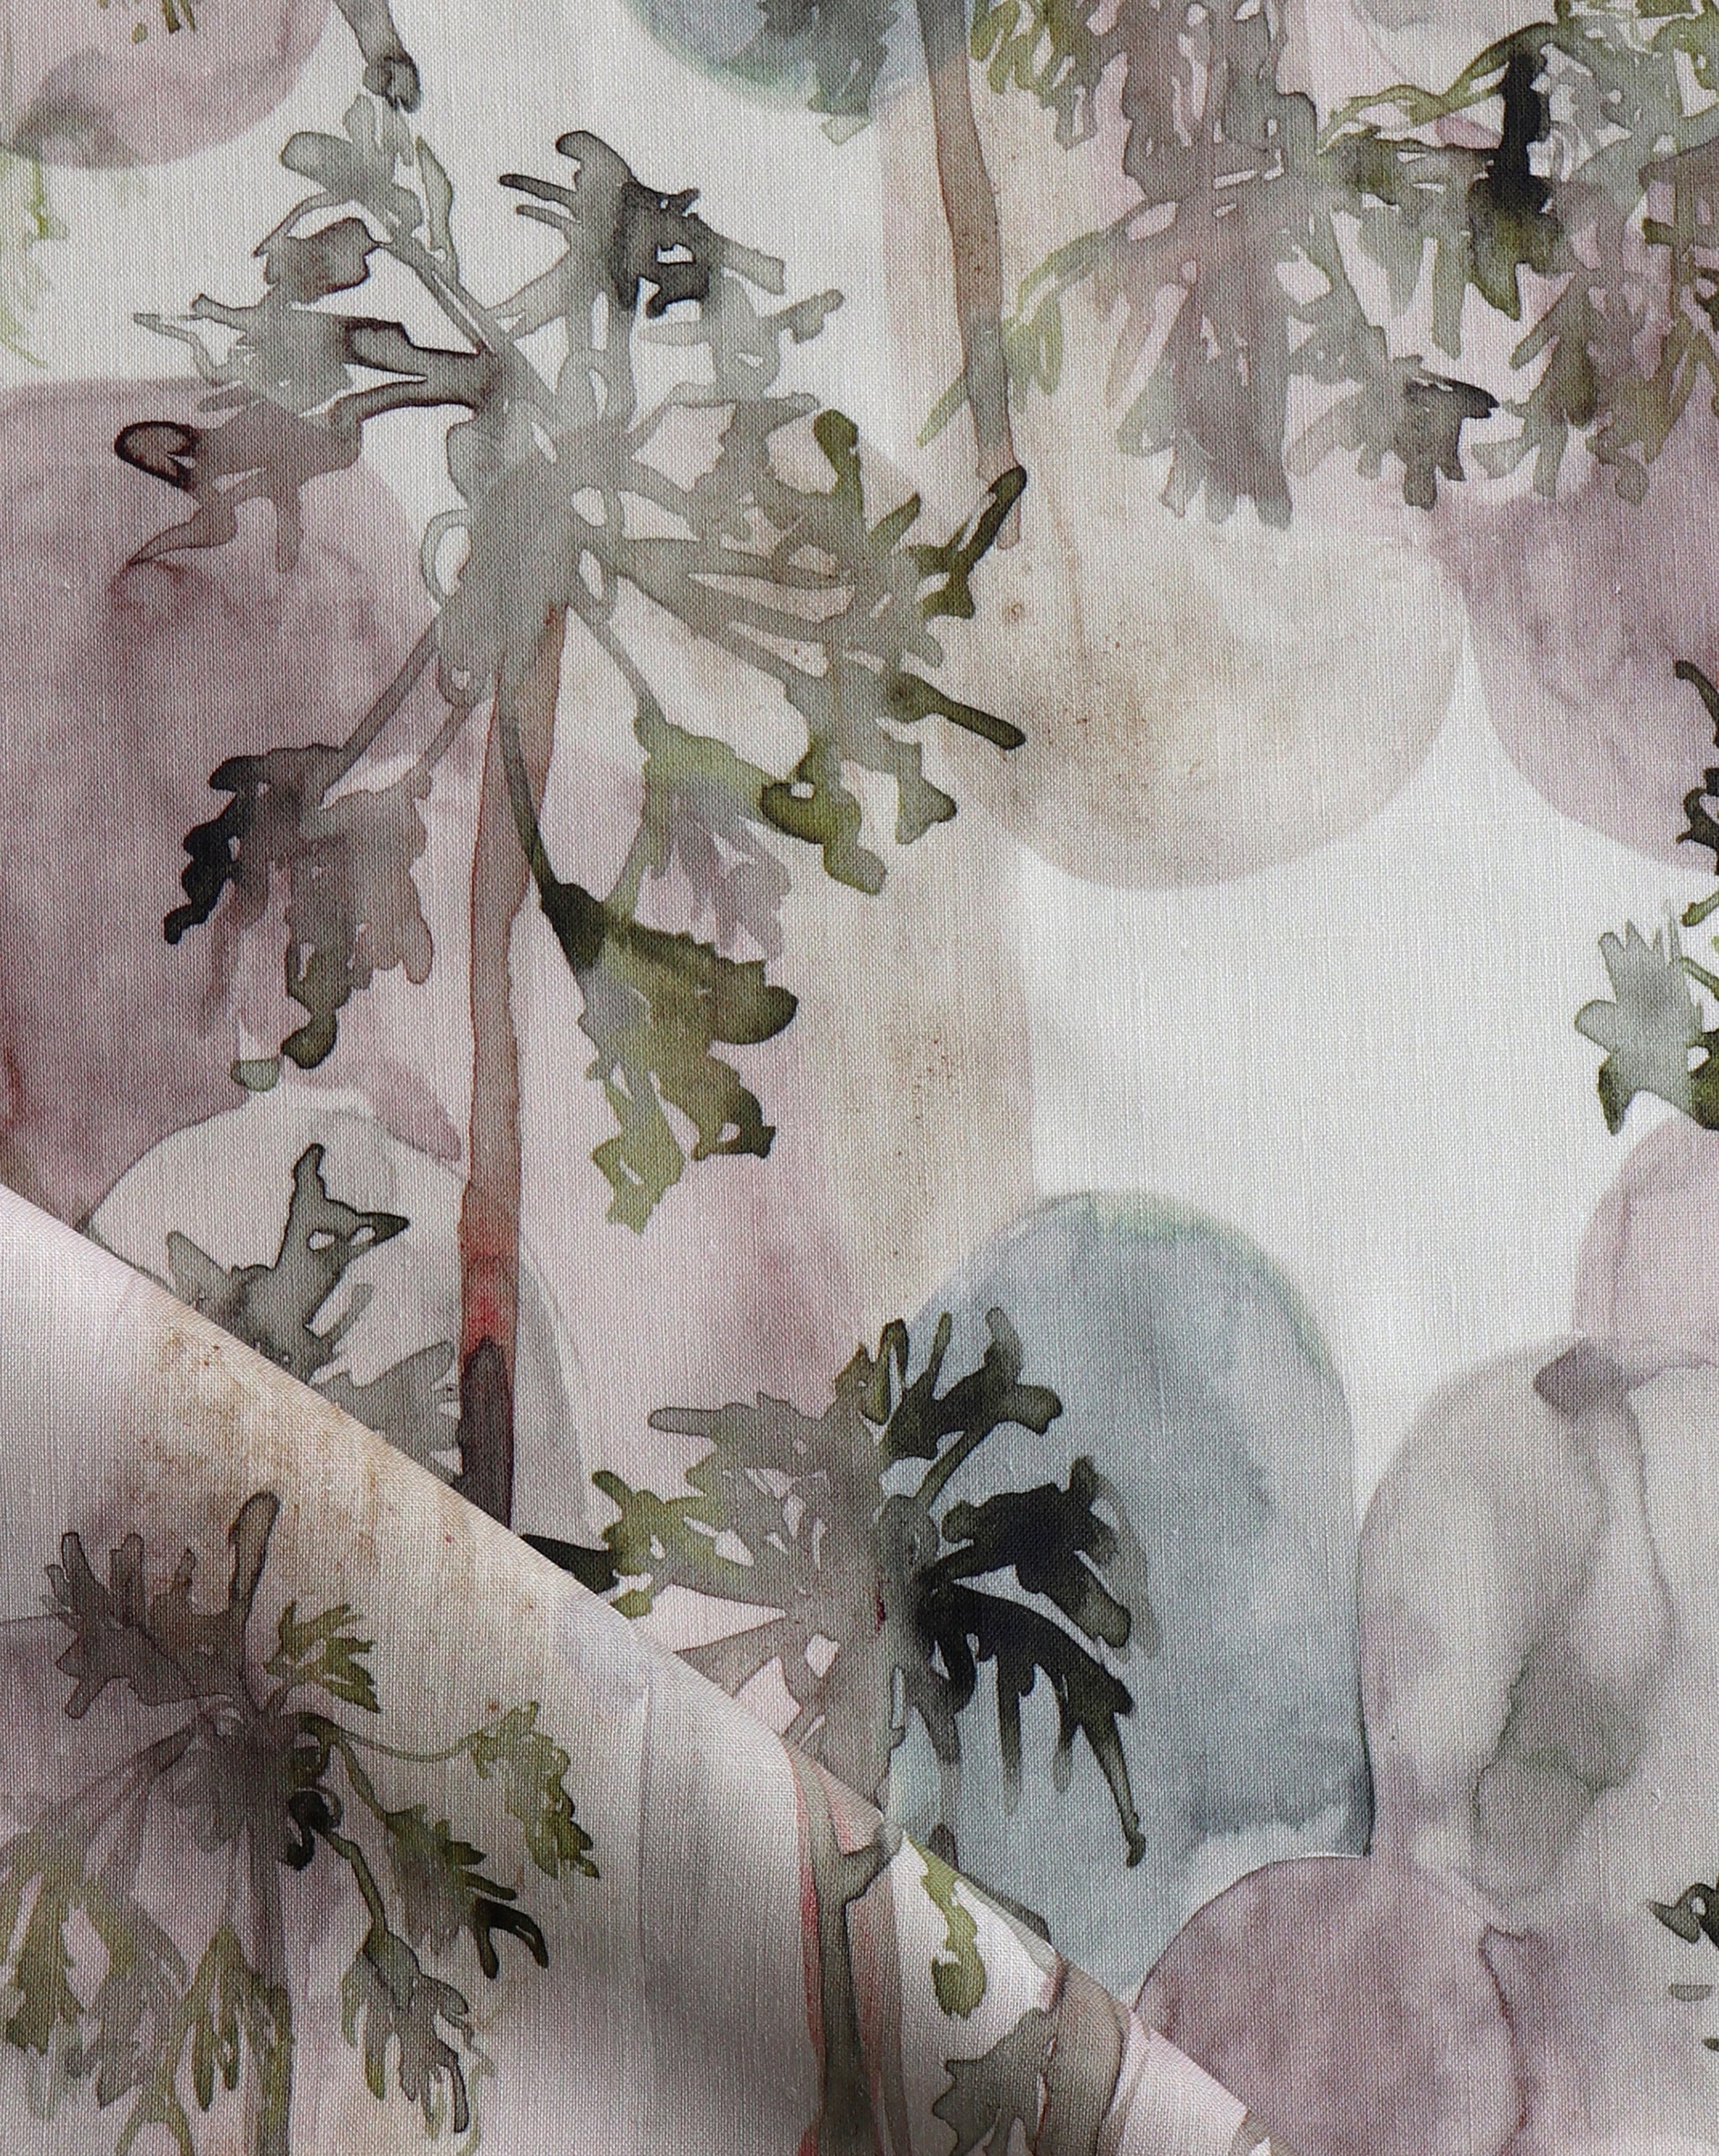 Featuring watercolor studies of a tropical tree, Papaya Arc fabric in our Dusk colorway juxtaposes avocado green with muted pinks